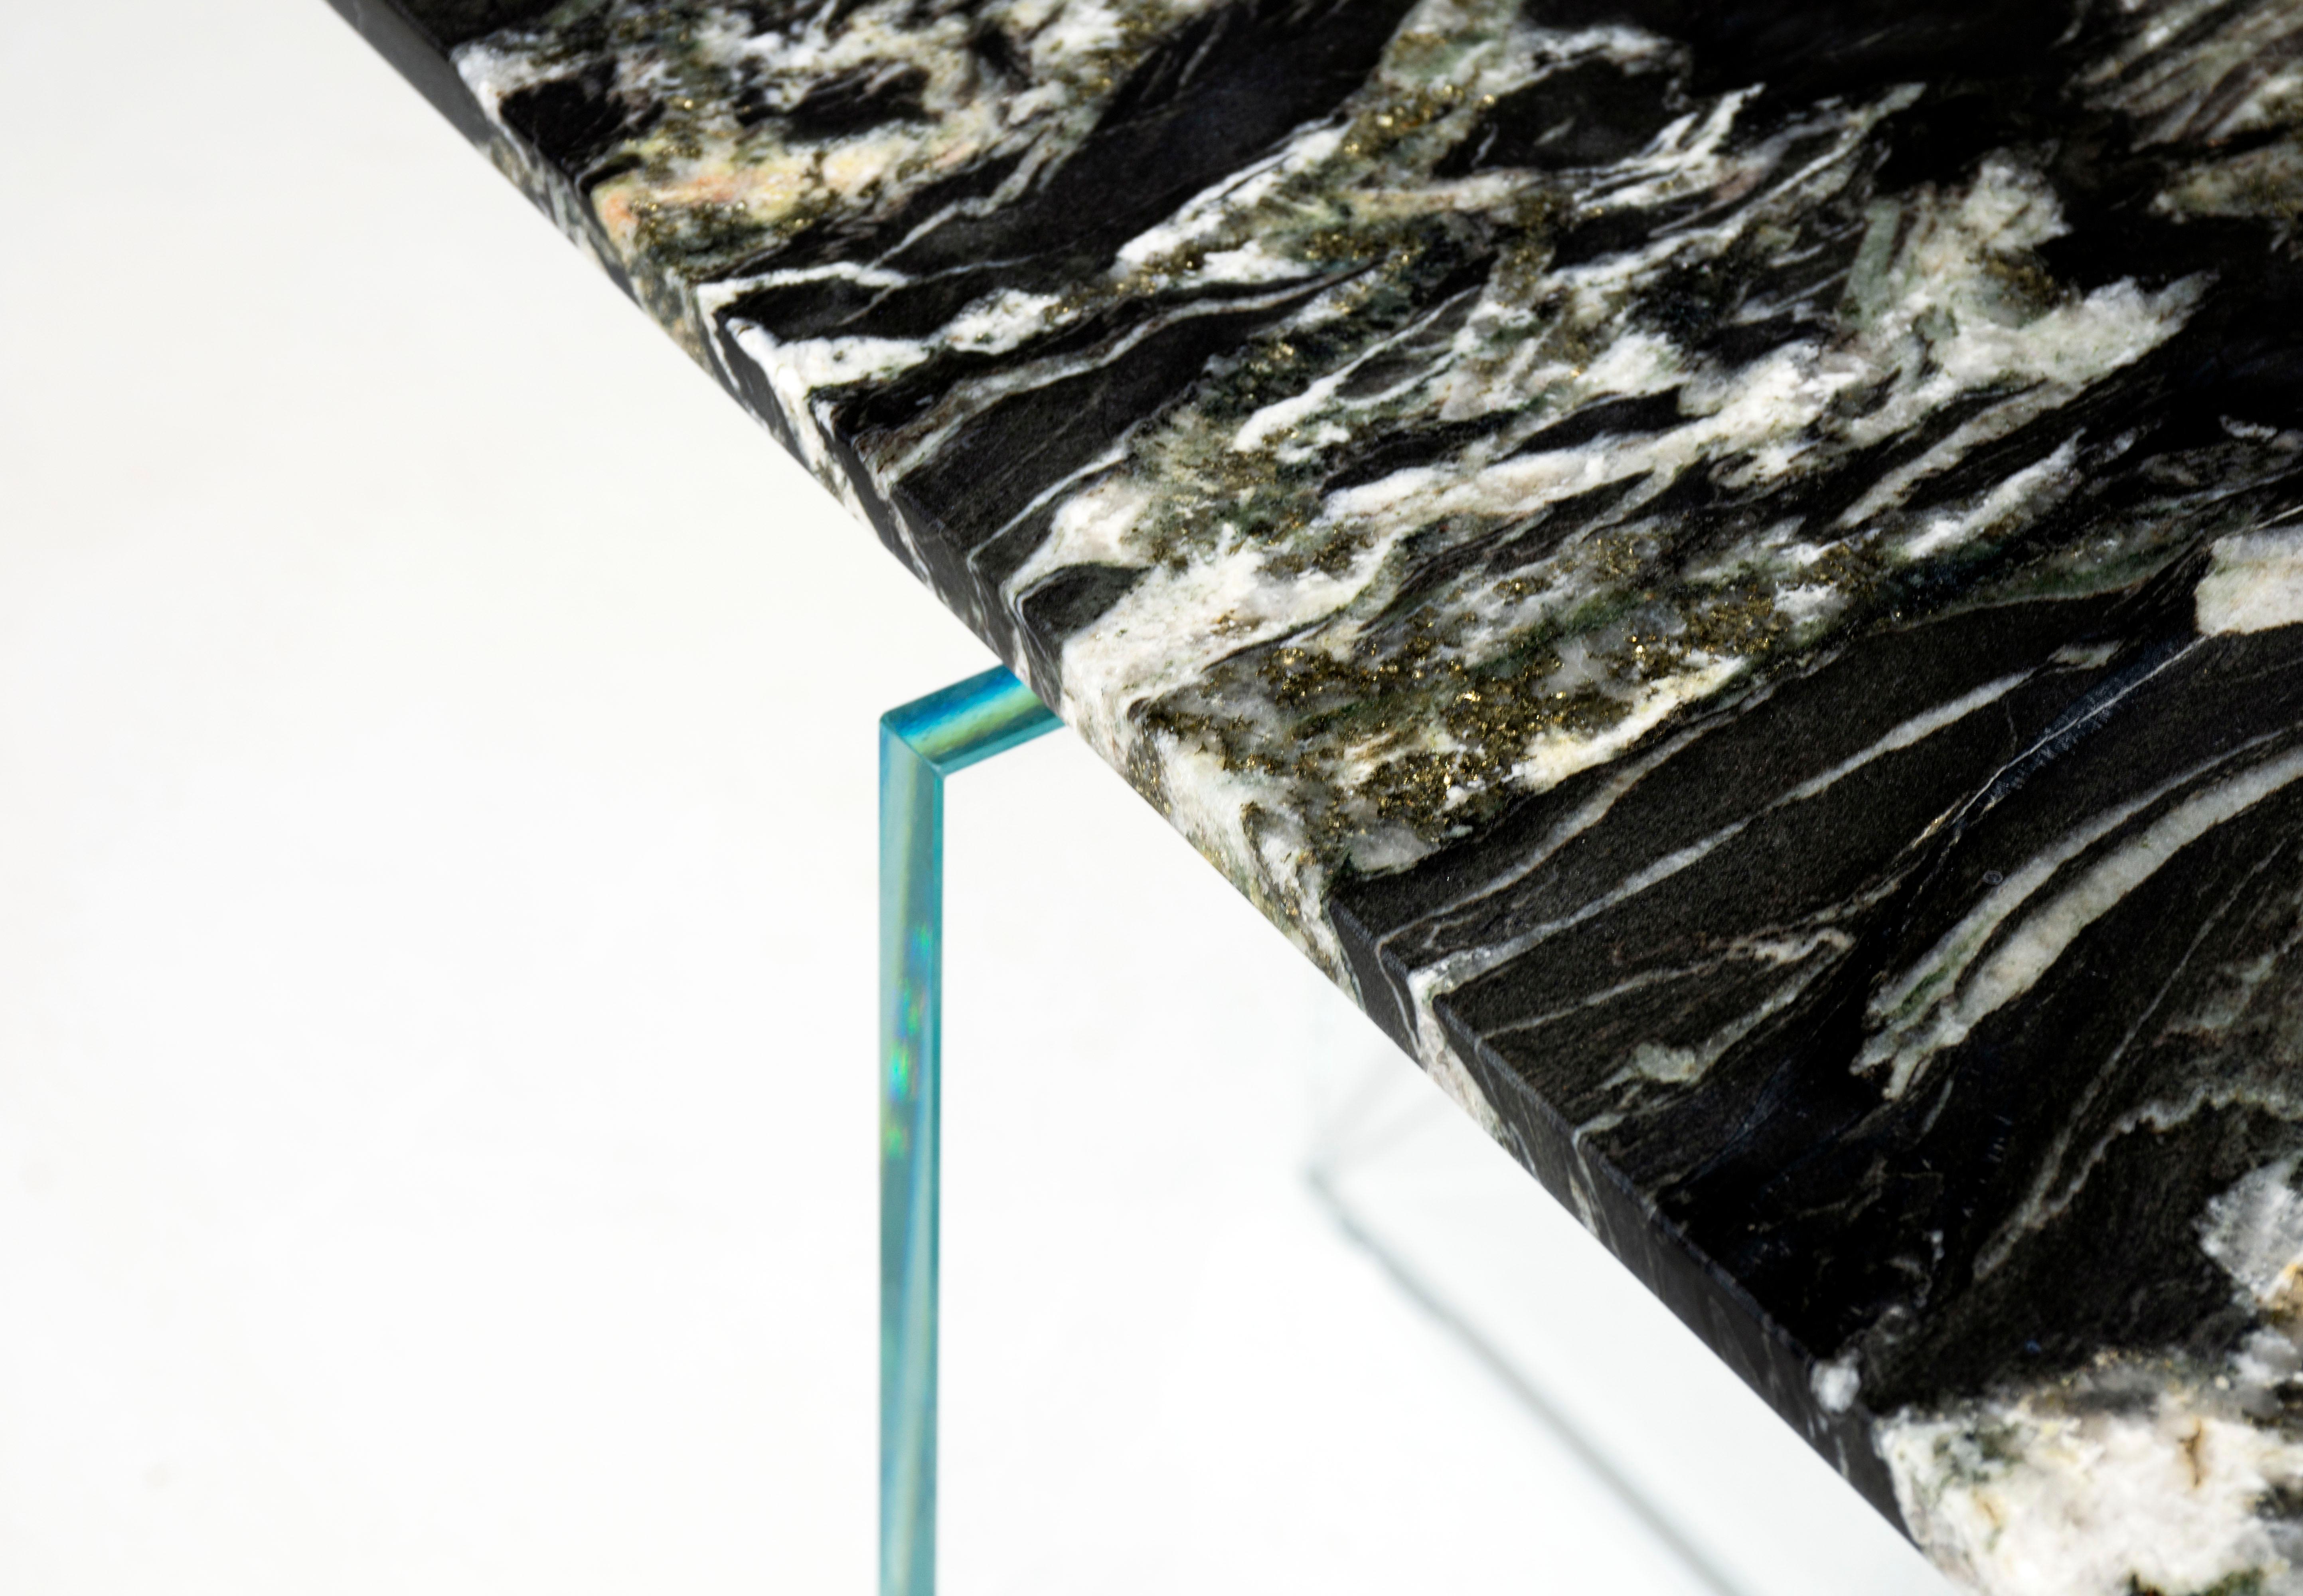 A simple table with a subtle gesture where the marble top appears to float above the glass base. Achieved by hand shaping each piece of stone, the thin edge disguises the actual thickness of marble while achieving a sense of disconnect from the